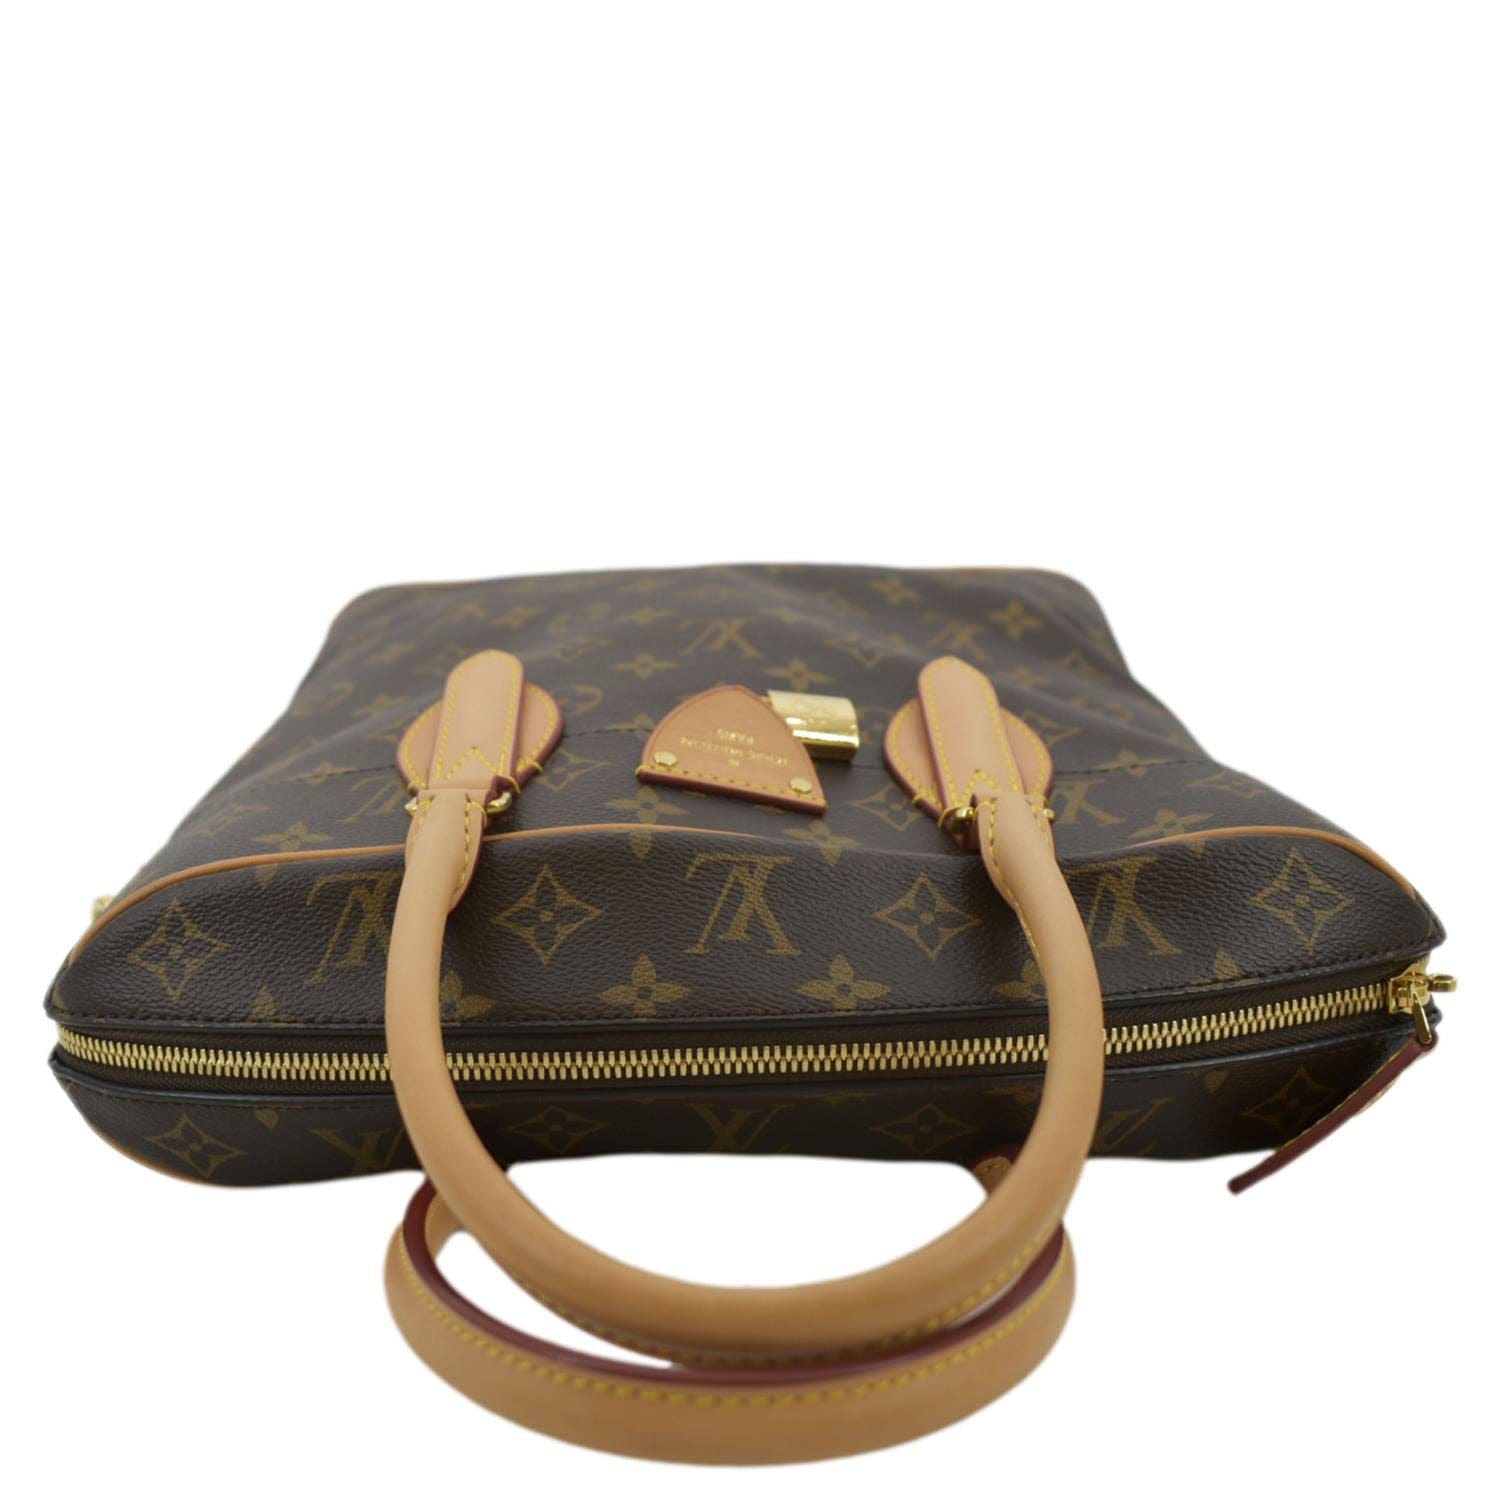 carry on suitcase louis vuitton